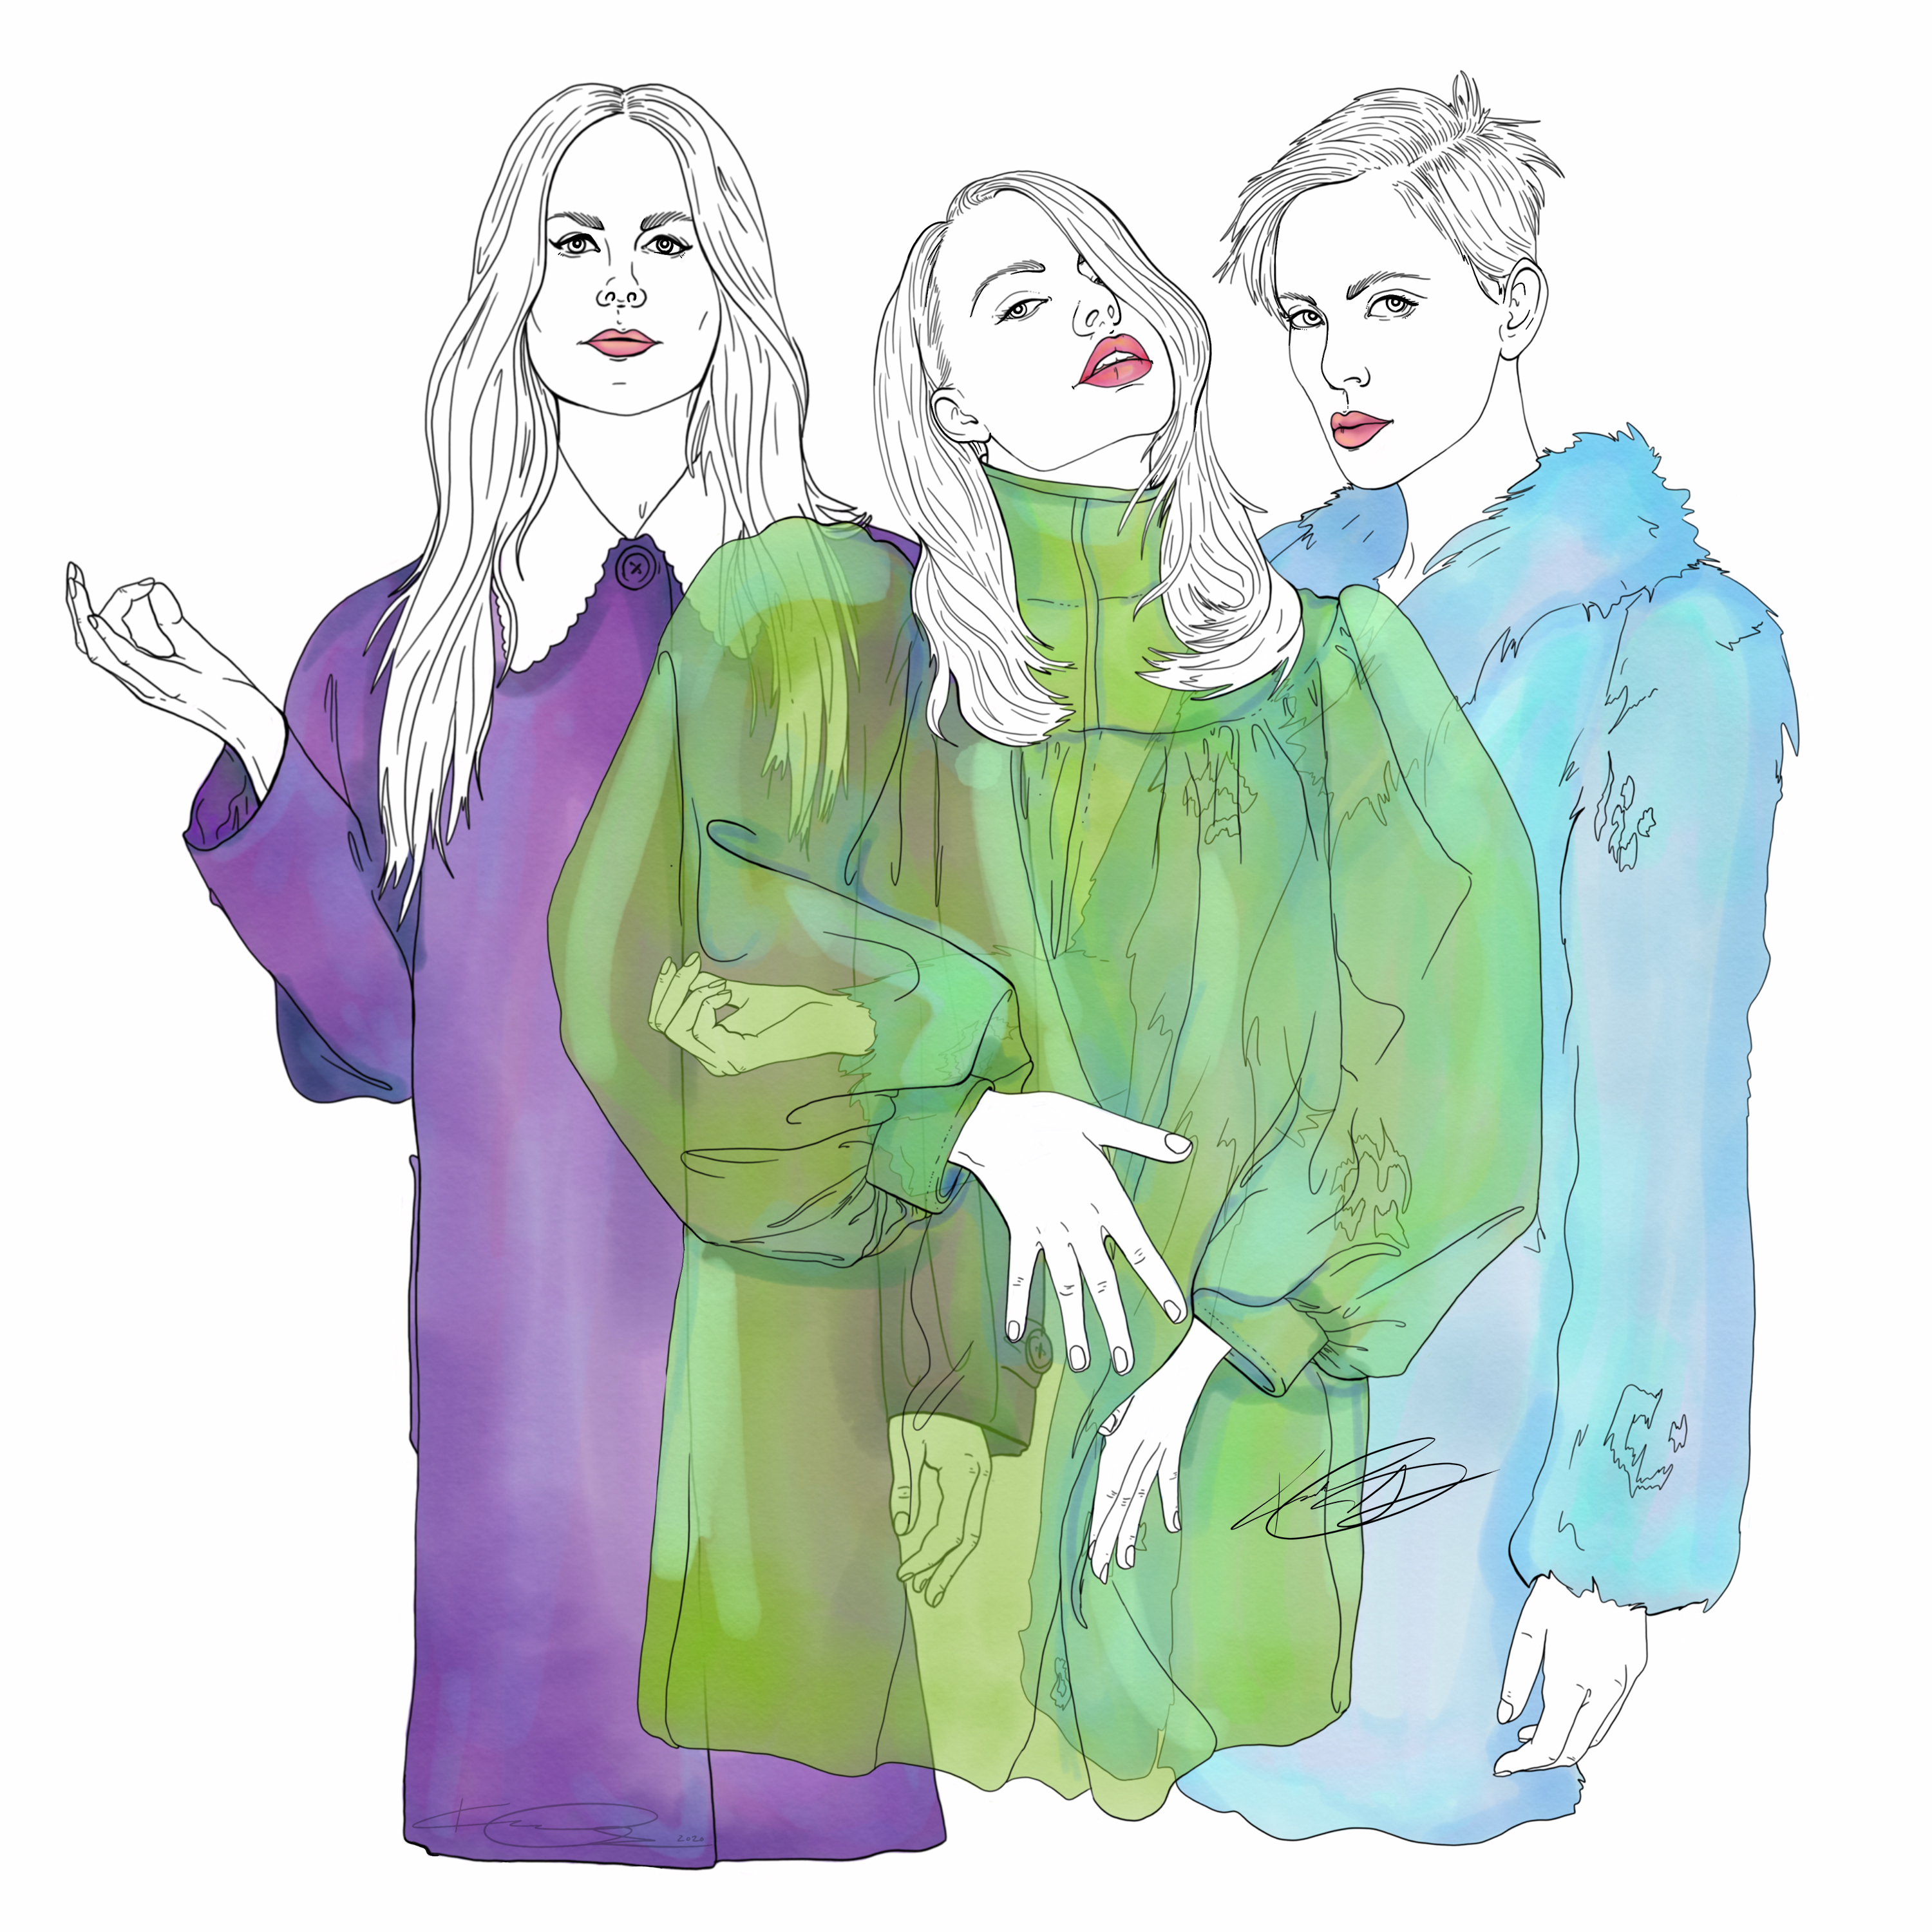 Digital painting of 3 women posing together in fashionable clothing.